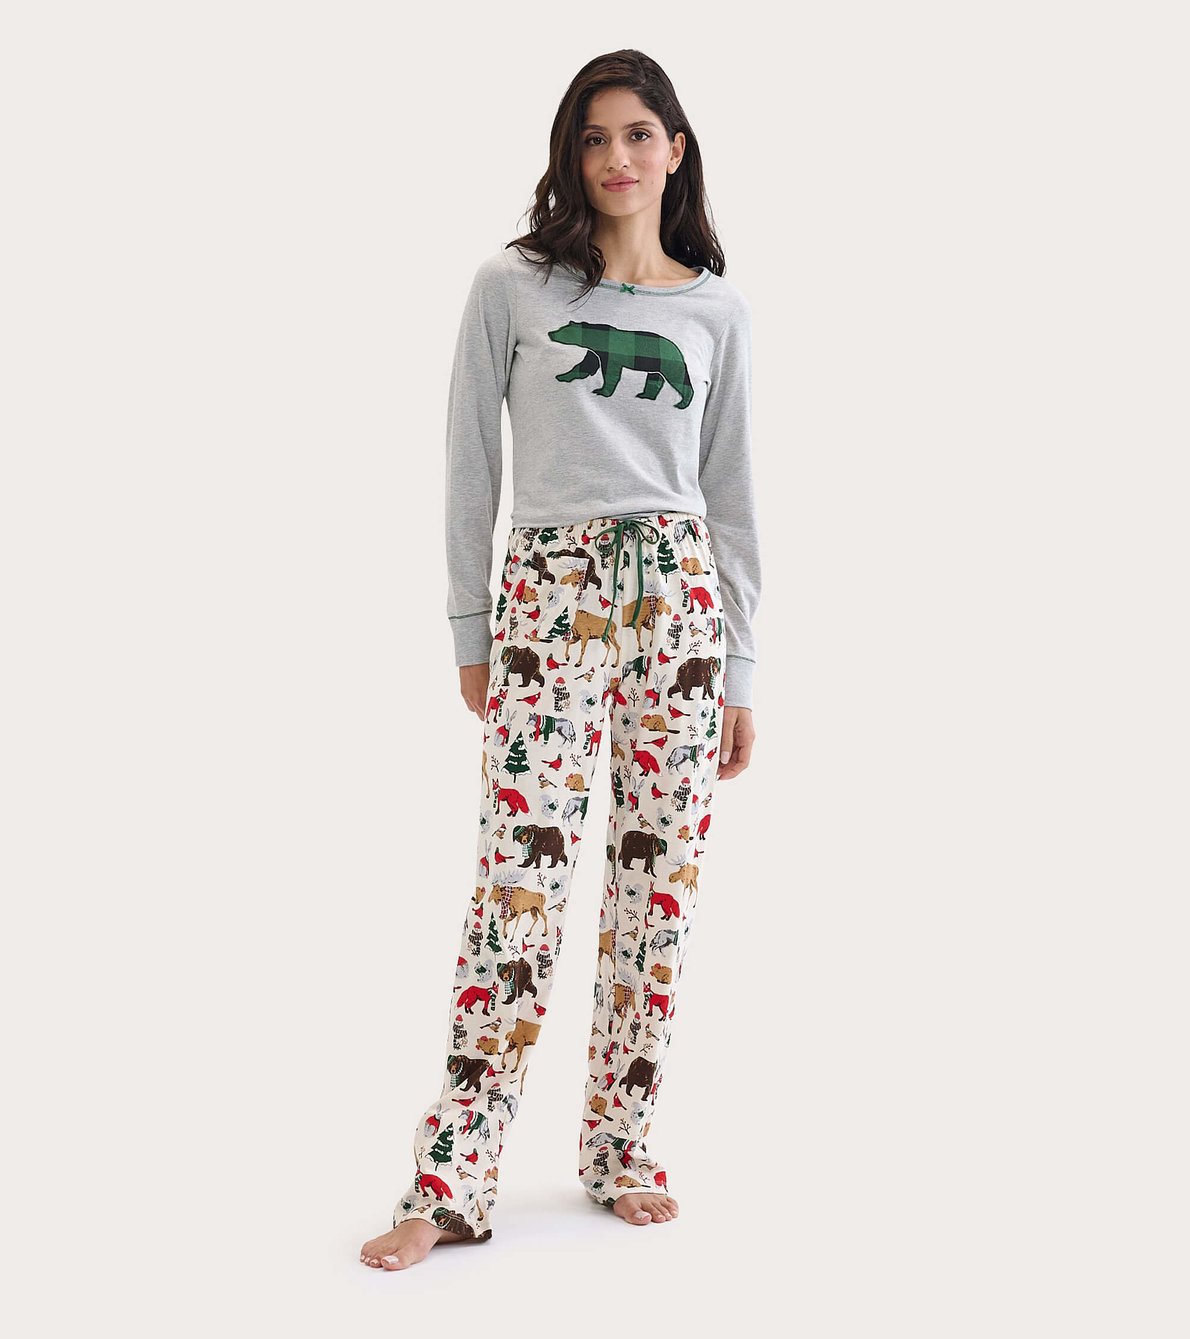 View larger image of Woodland Winter Women's Jersey Top and Pants Pajama Separates